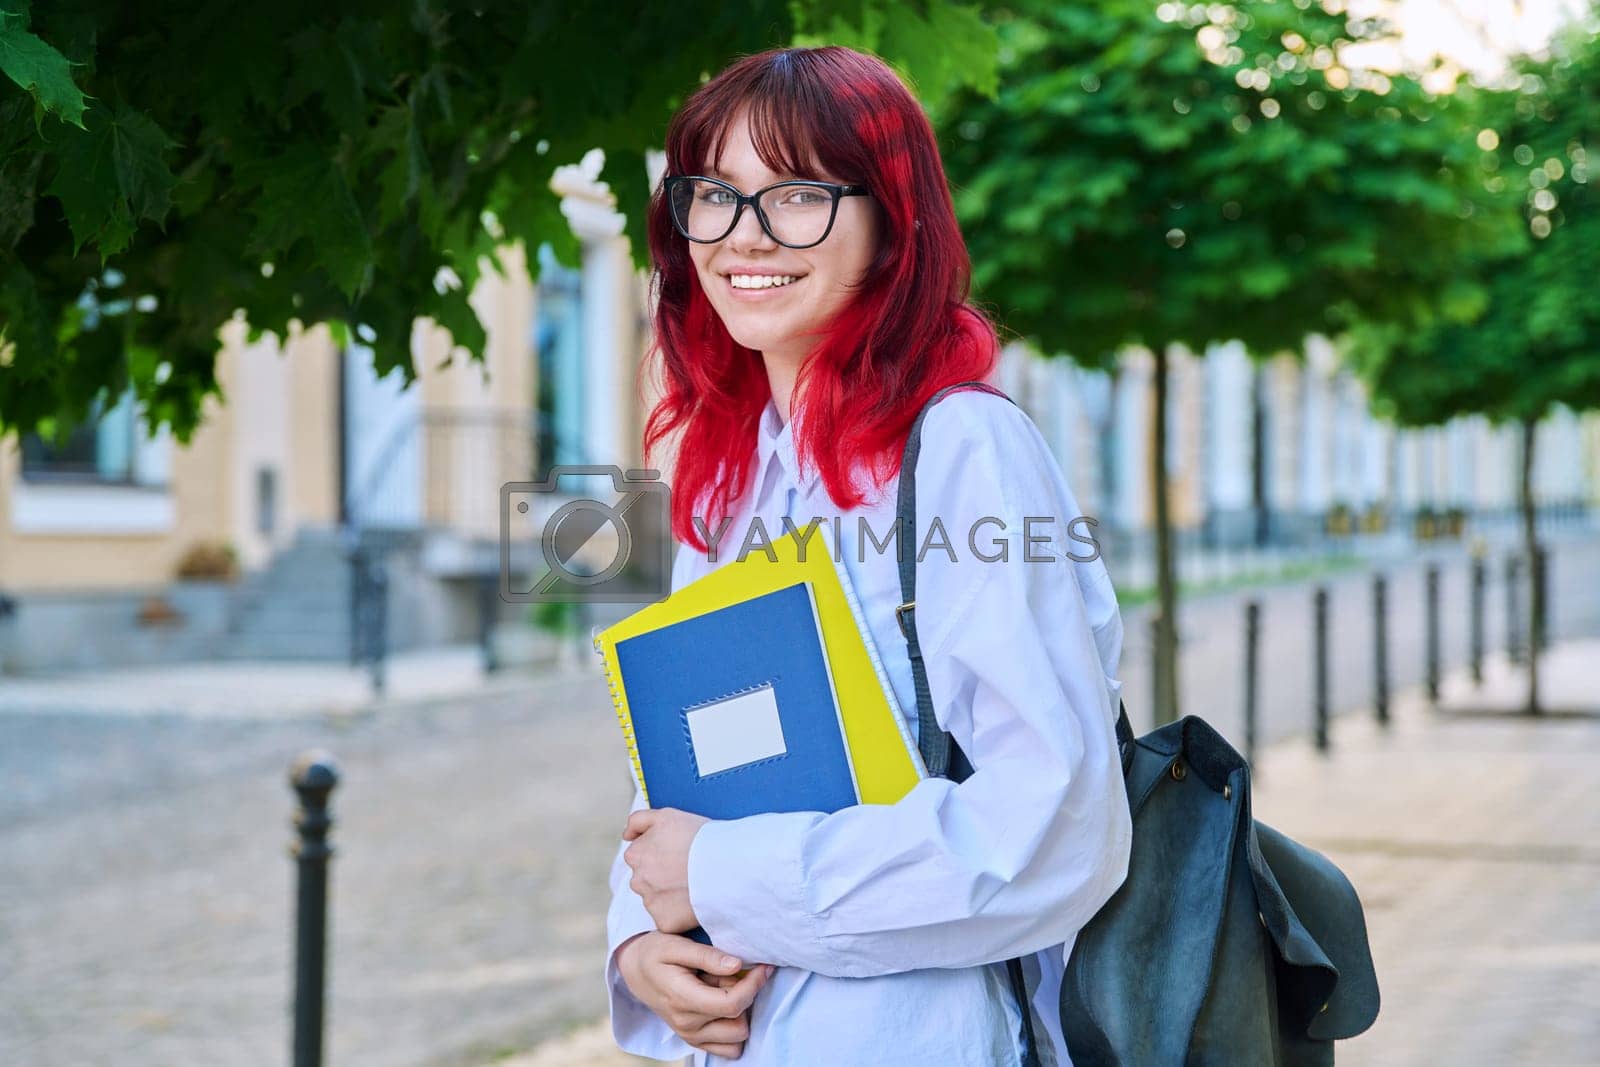 Royalty free image of Portrait of smiling female student 18, 19 years old on city street by VH-studio